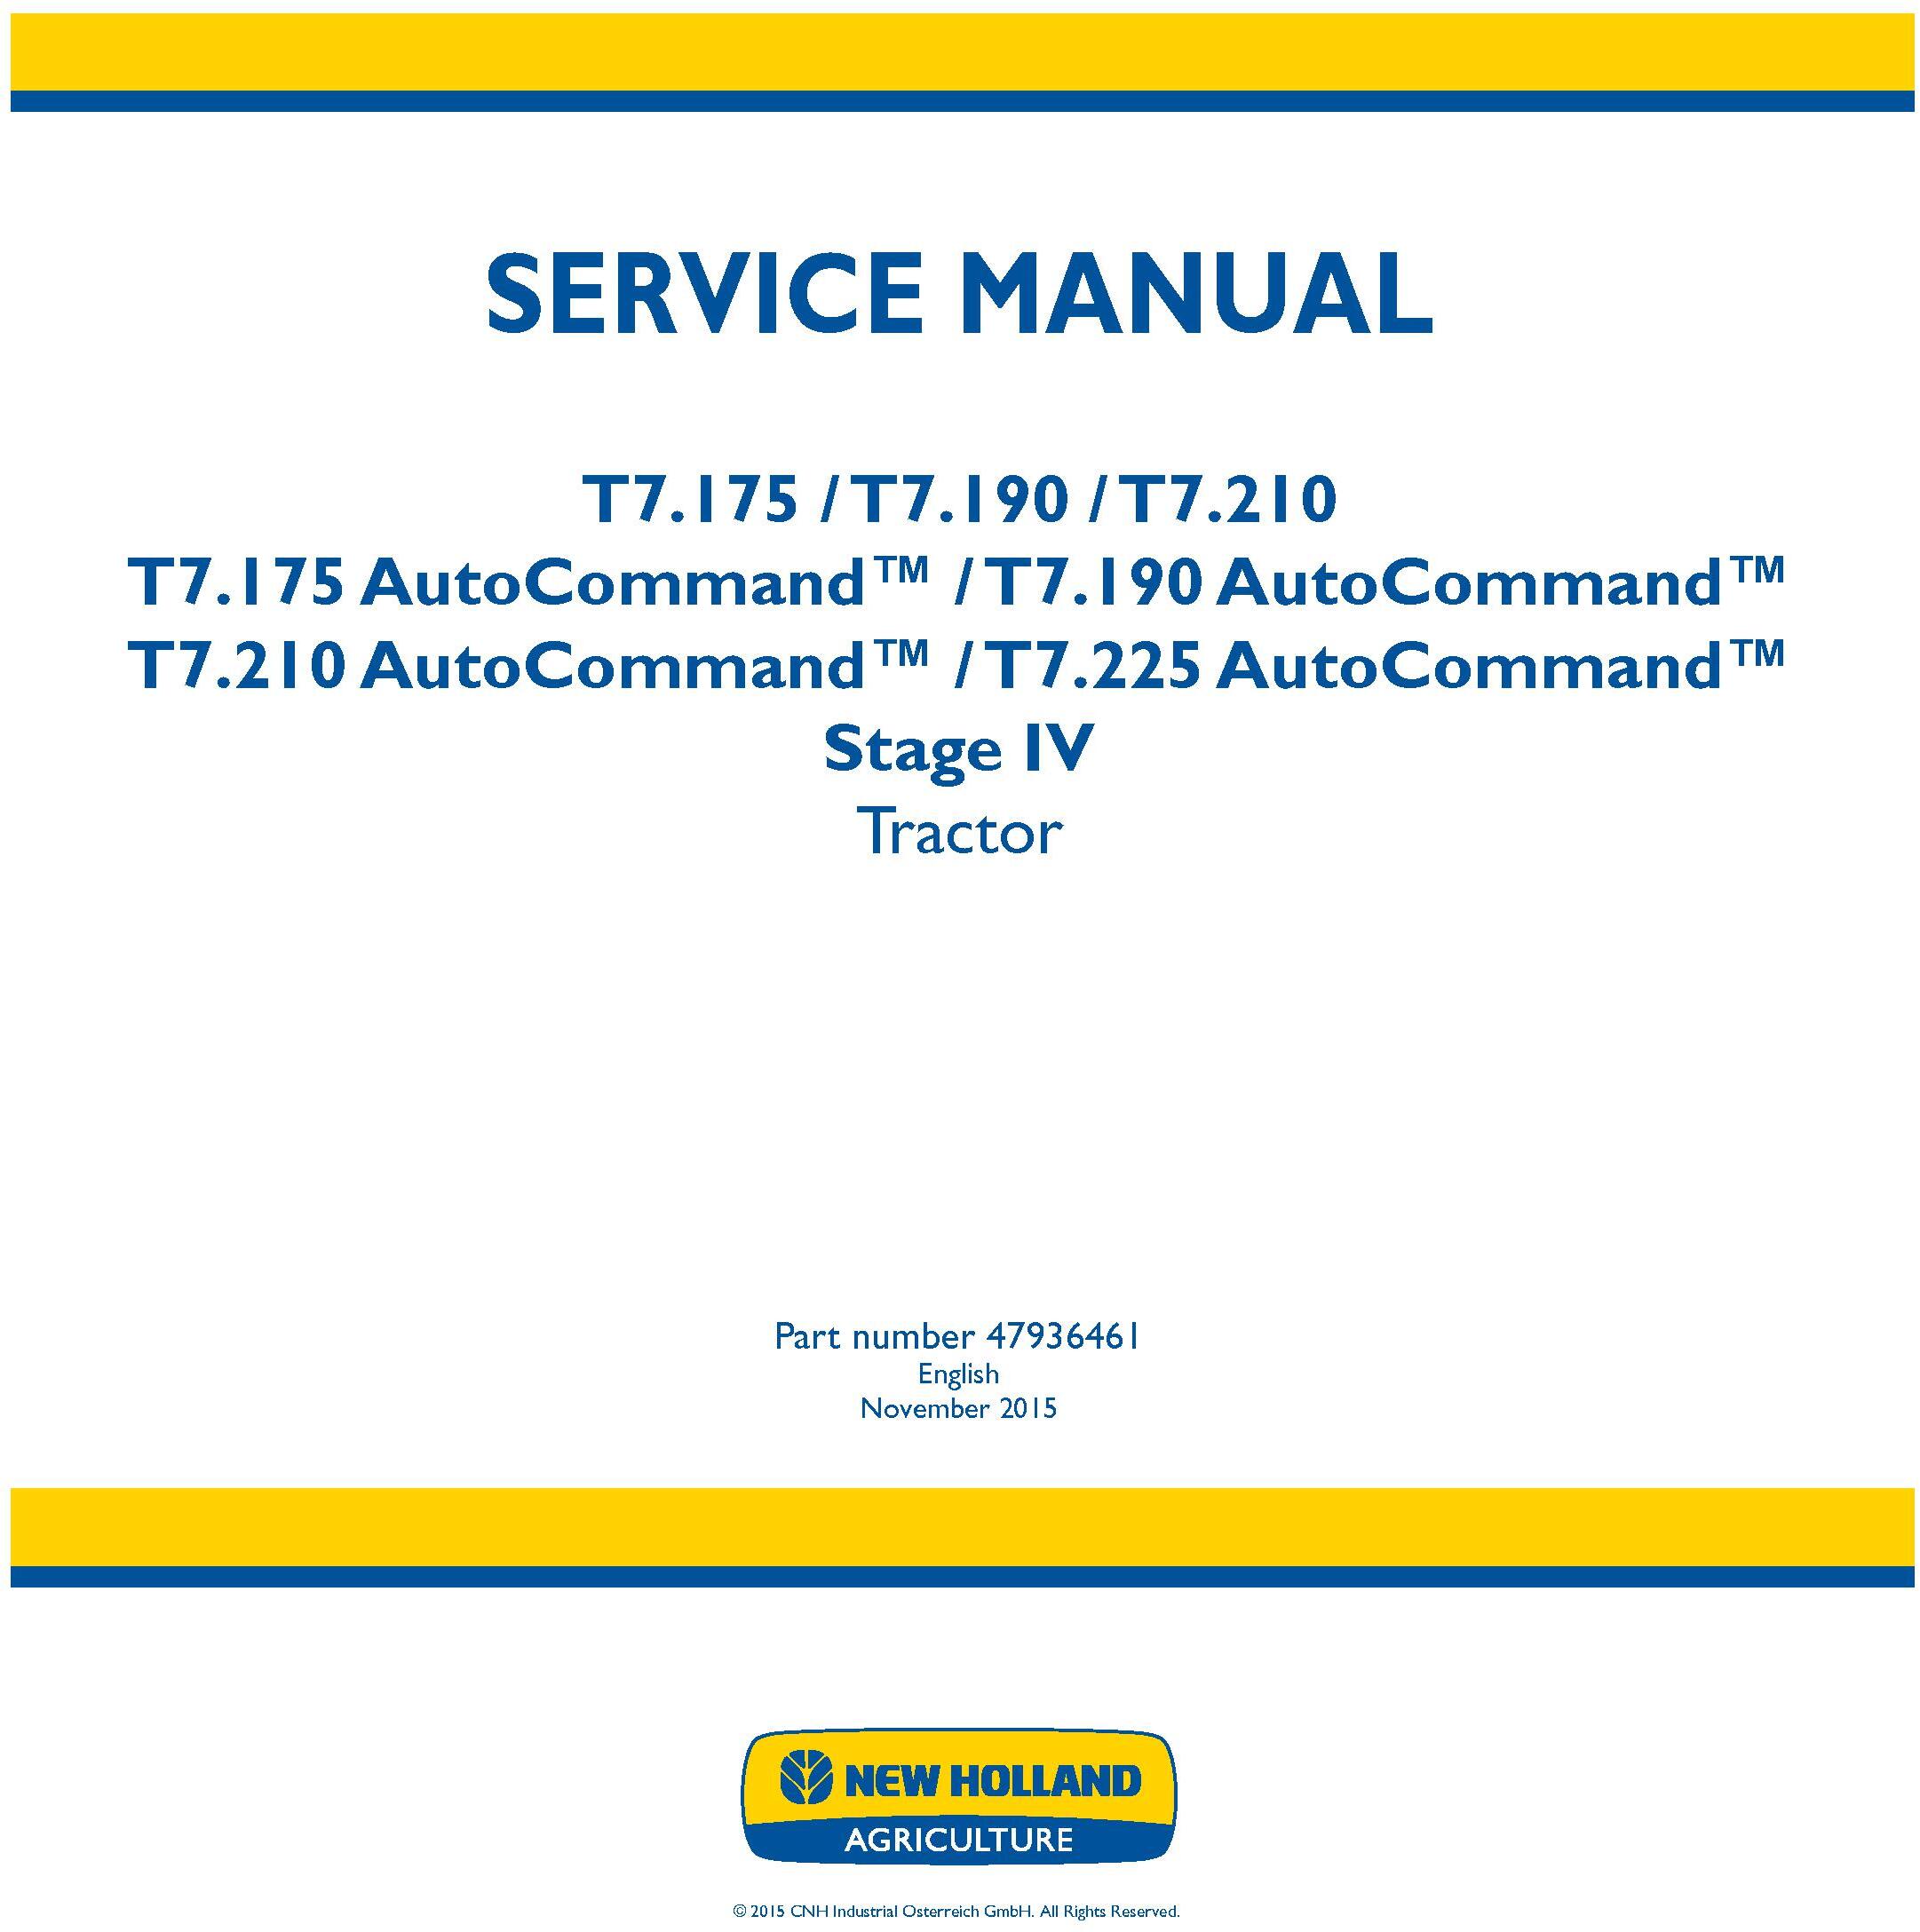 New Holland T7.175, T7.190, T7.210, T7.225 Auto Command Stage IV Tractors Service Manual (Europe)